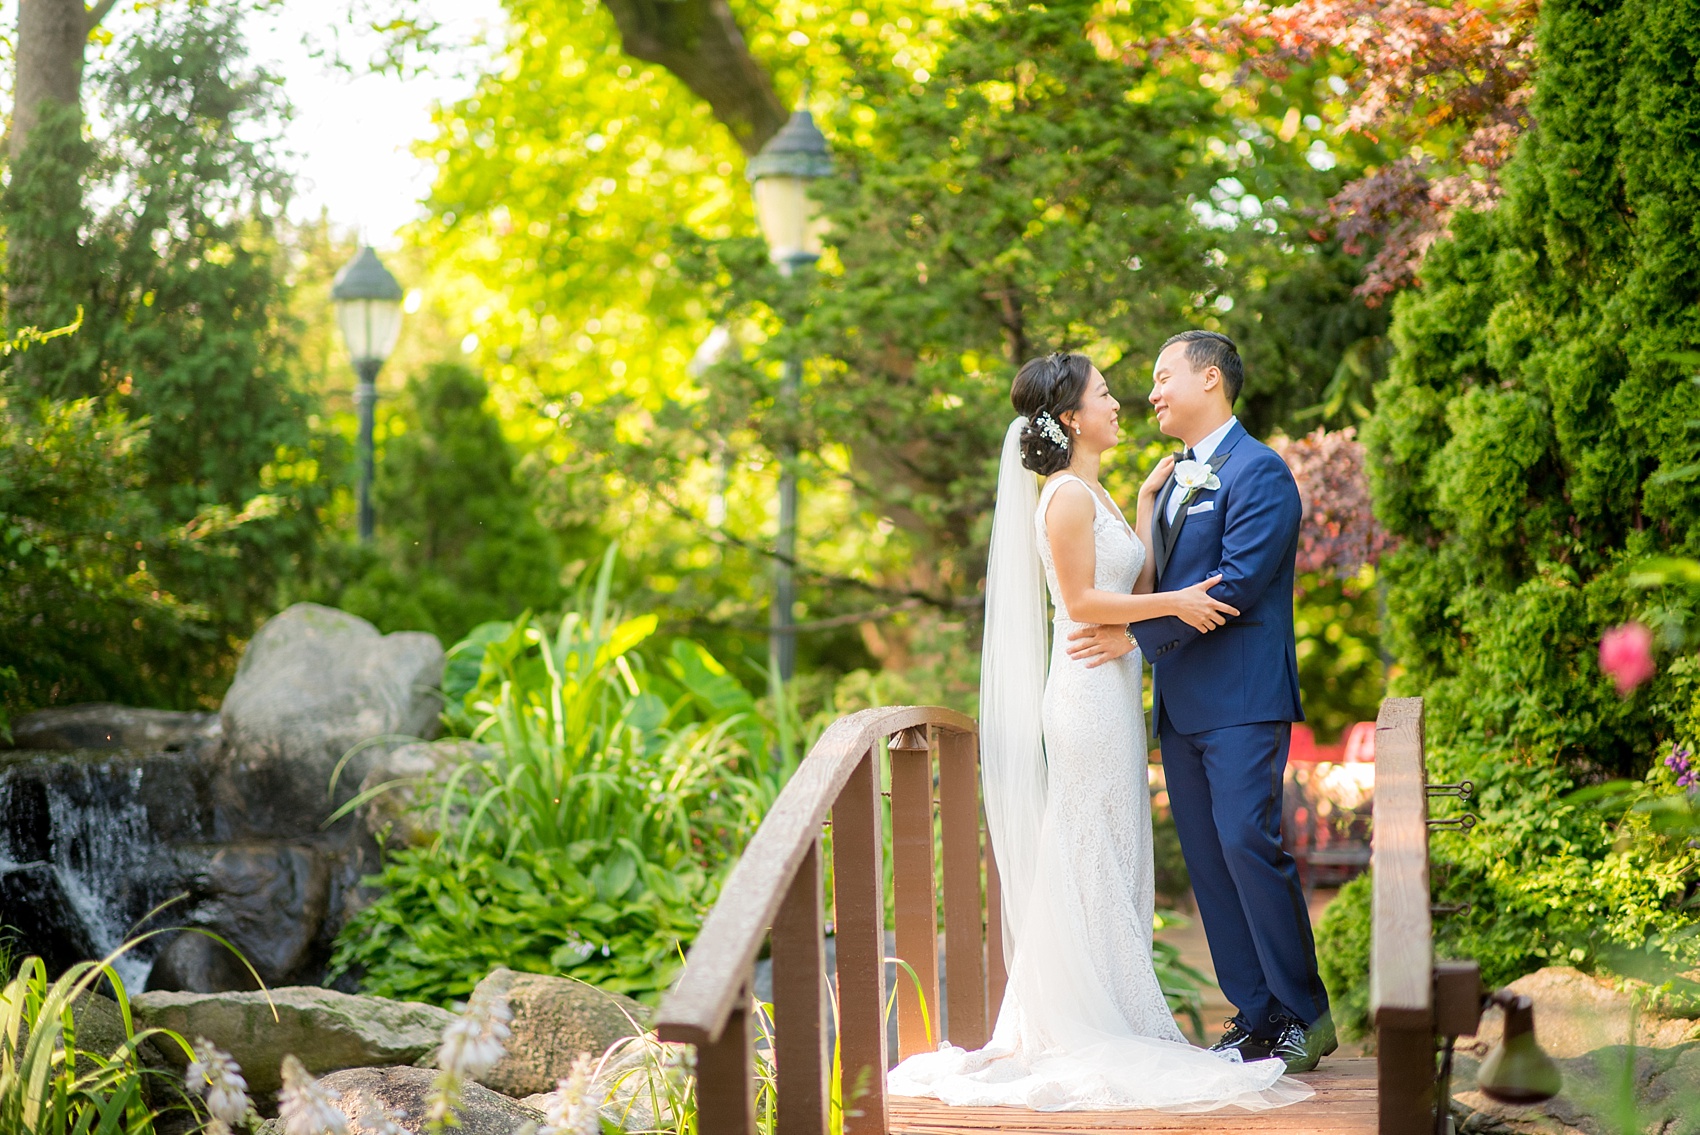 Westbury Manor wedding photos by Mikkel Paige photography. Bride in a lace Mikaella gown and groom in a navy blue and black tuxedo for a Long Island summer celebration.